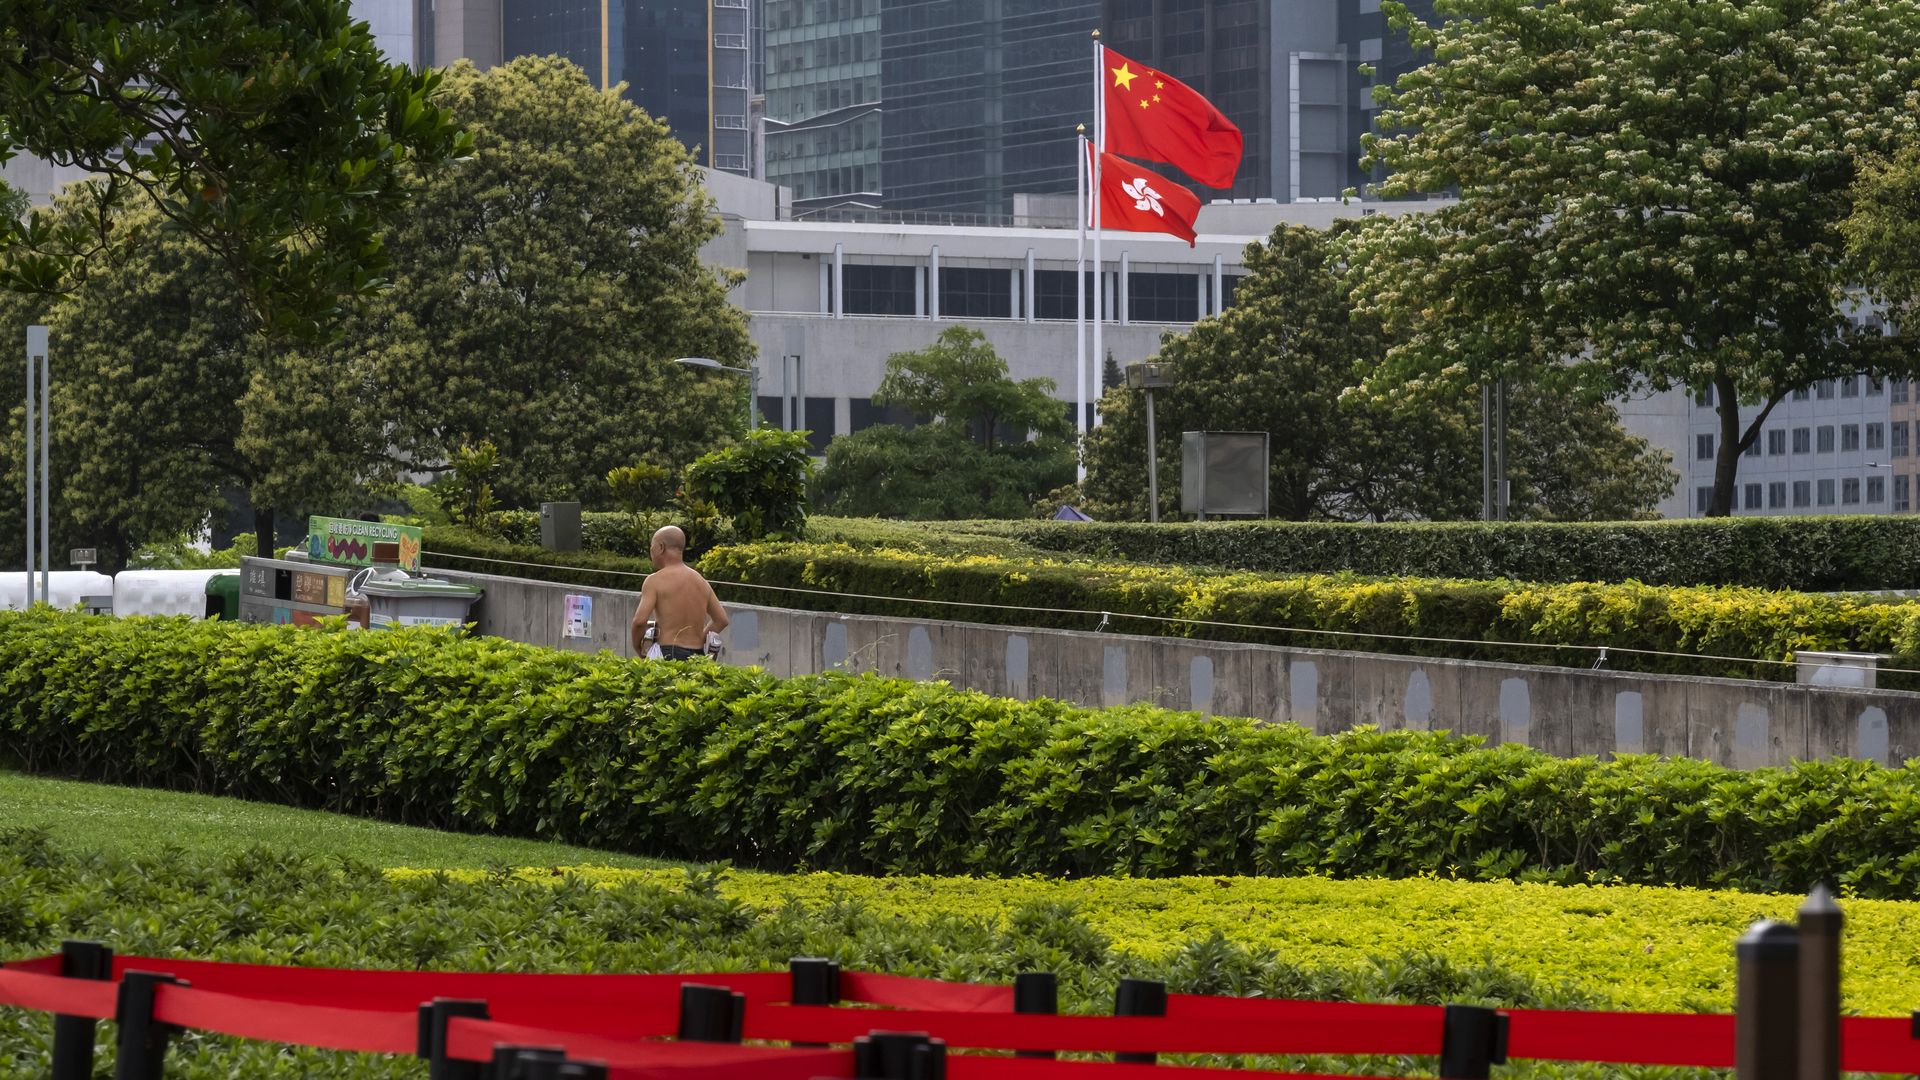 A person walks past the flags of China, top, and the Hong Kong Special Administrative Region (HKSAR) outside the Legislative Council building in Hong Kong, China, on Monday